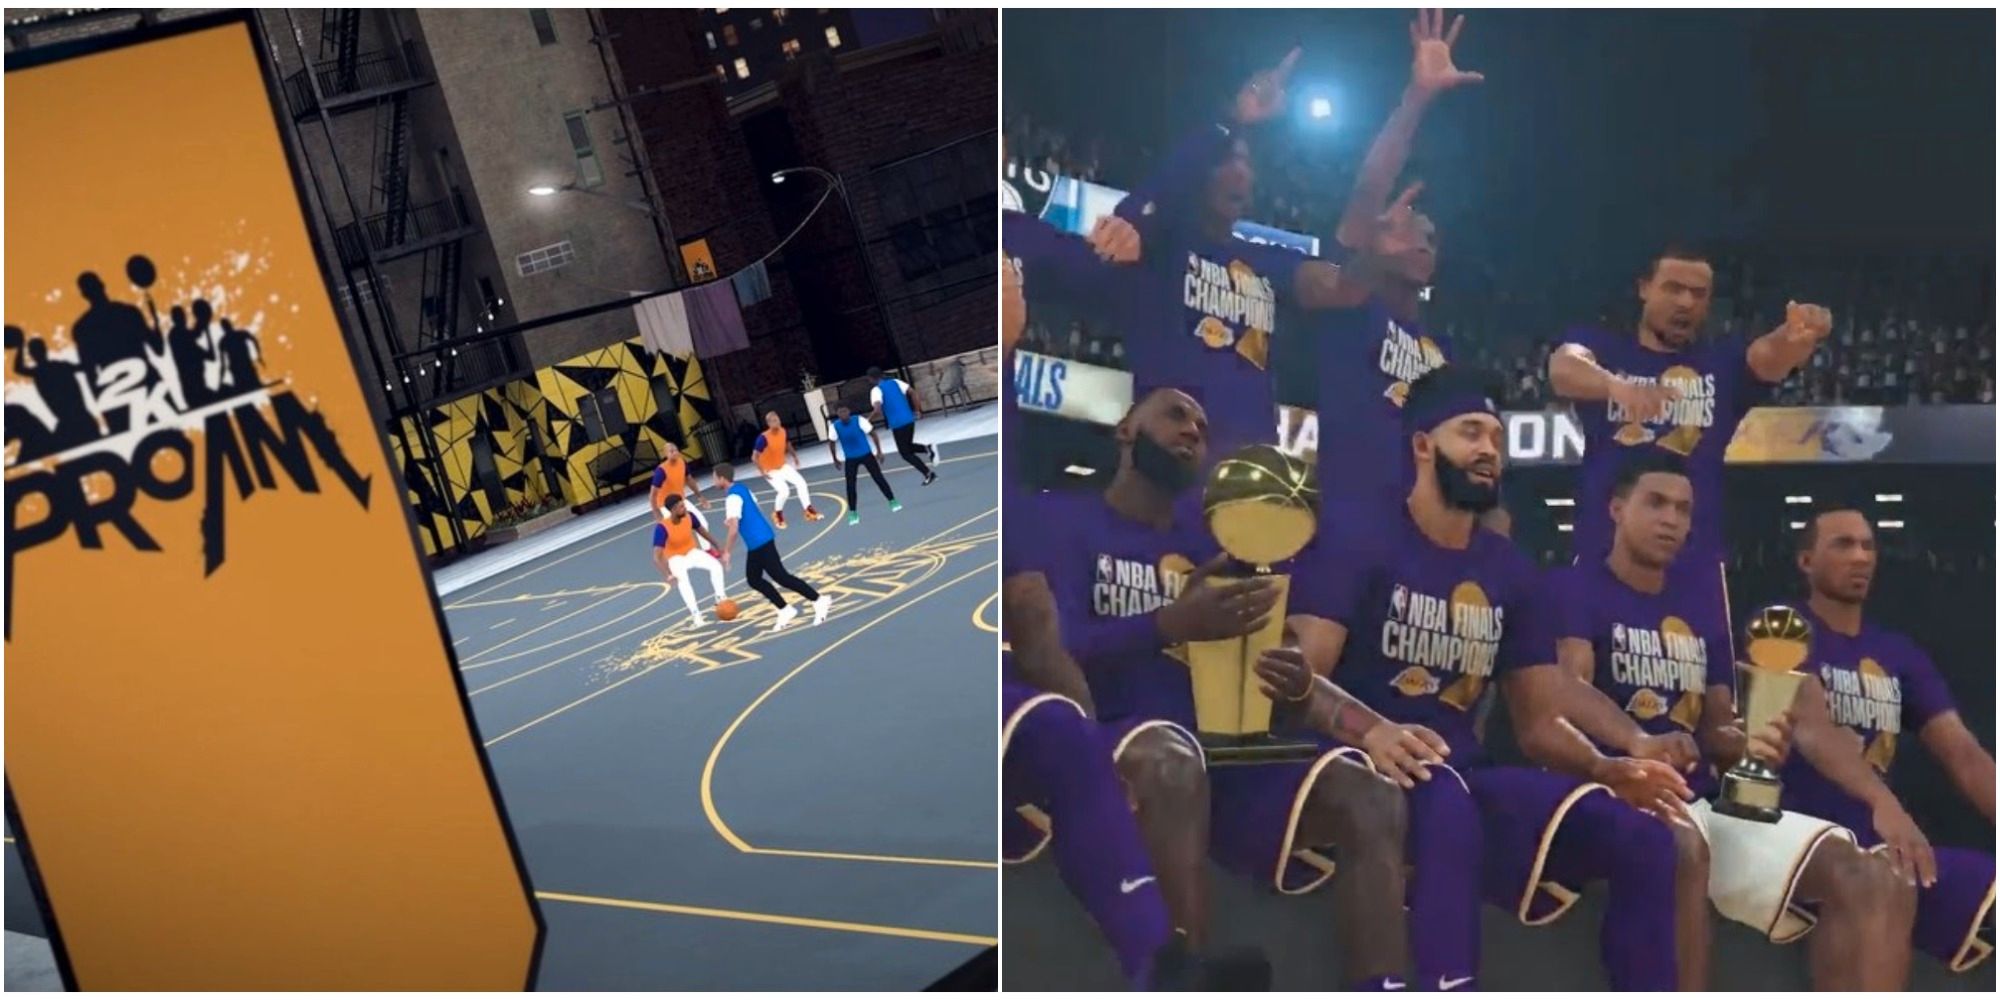 Nba 2k21 Gym Rat Collage Pro Am And Championship Lakers Team